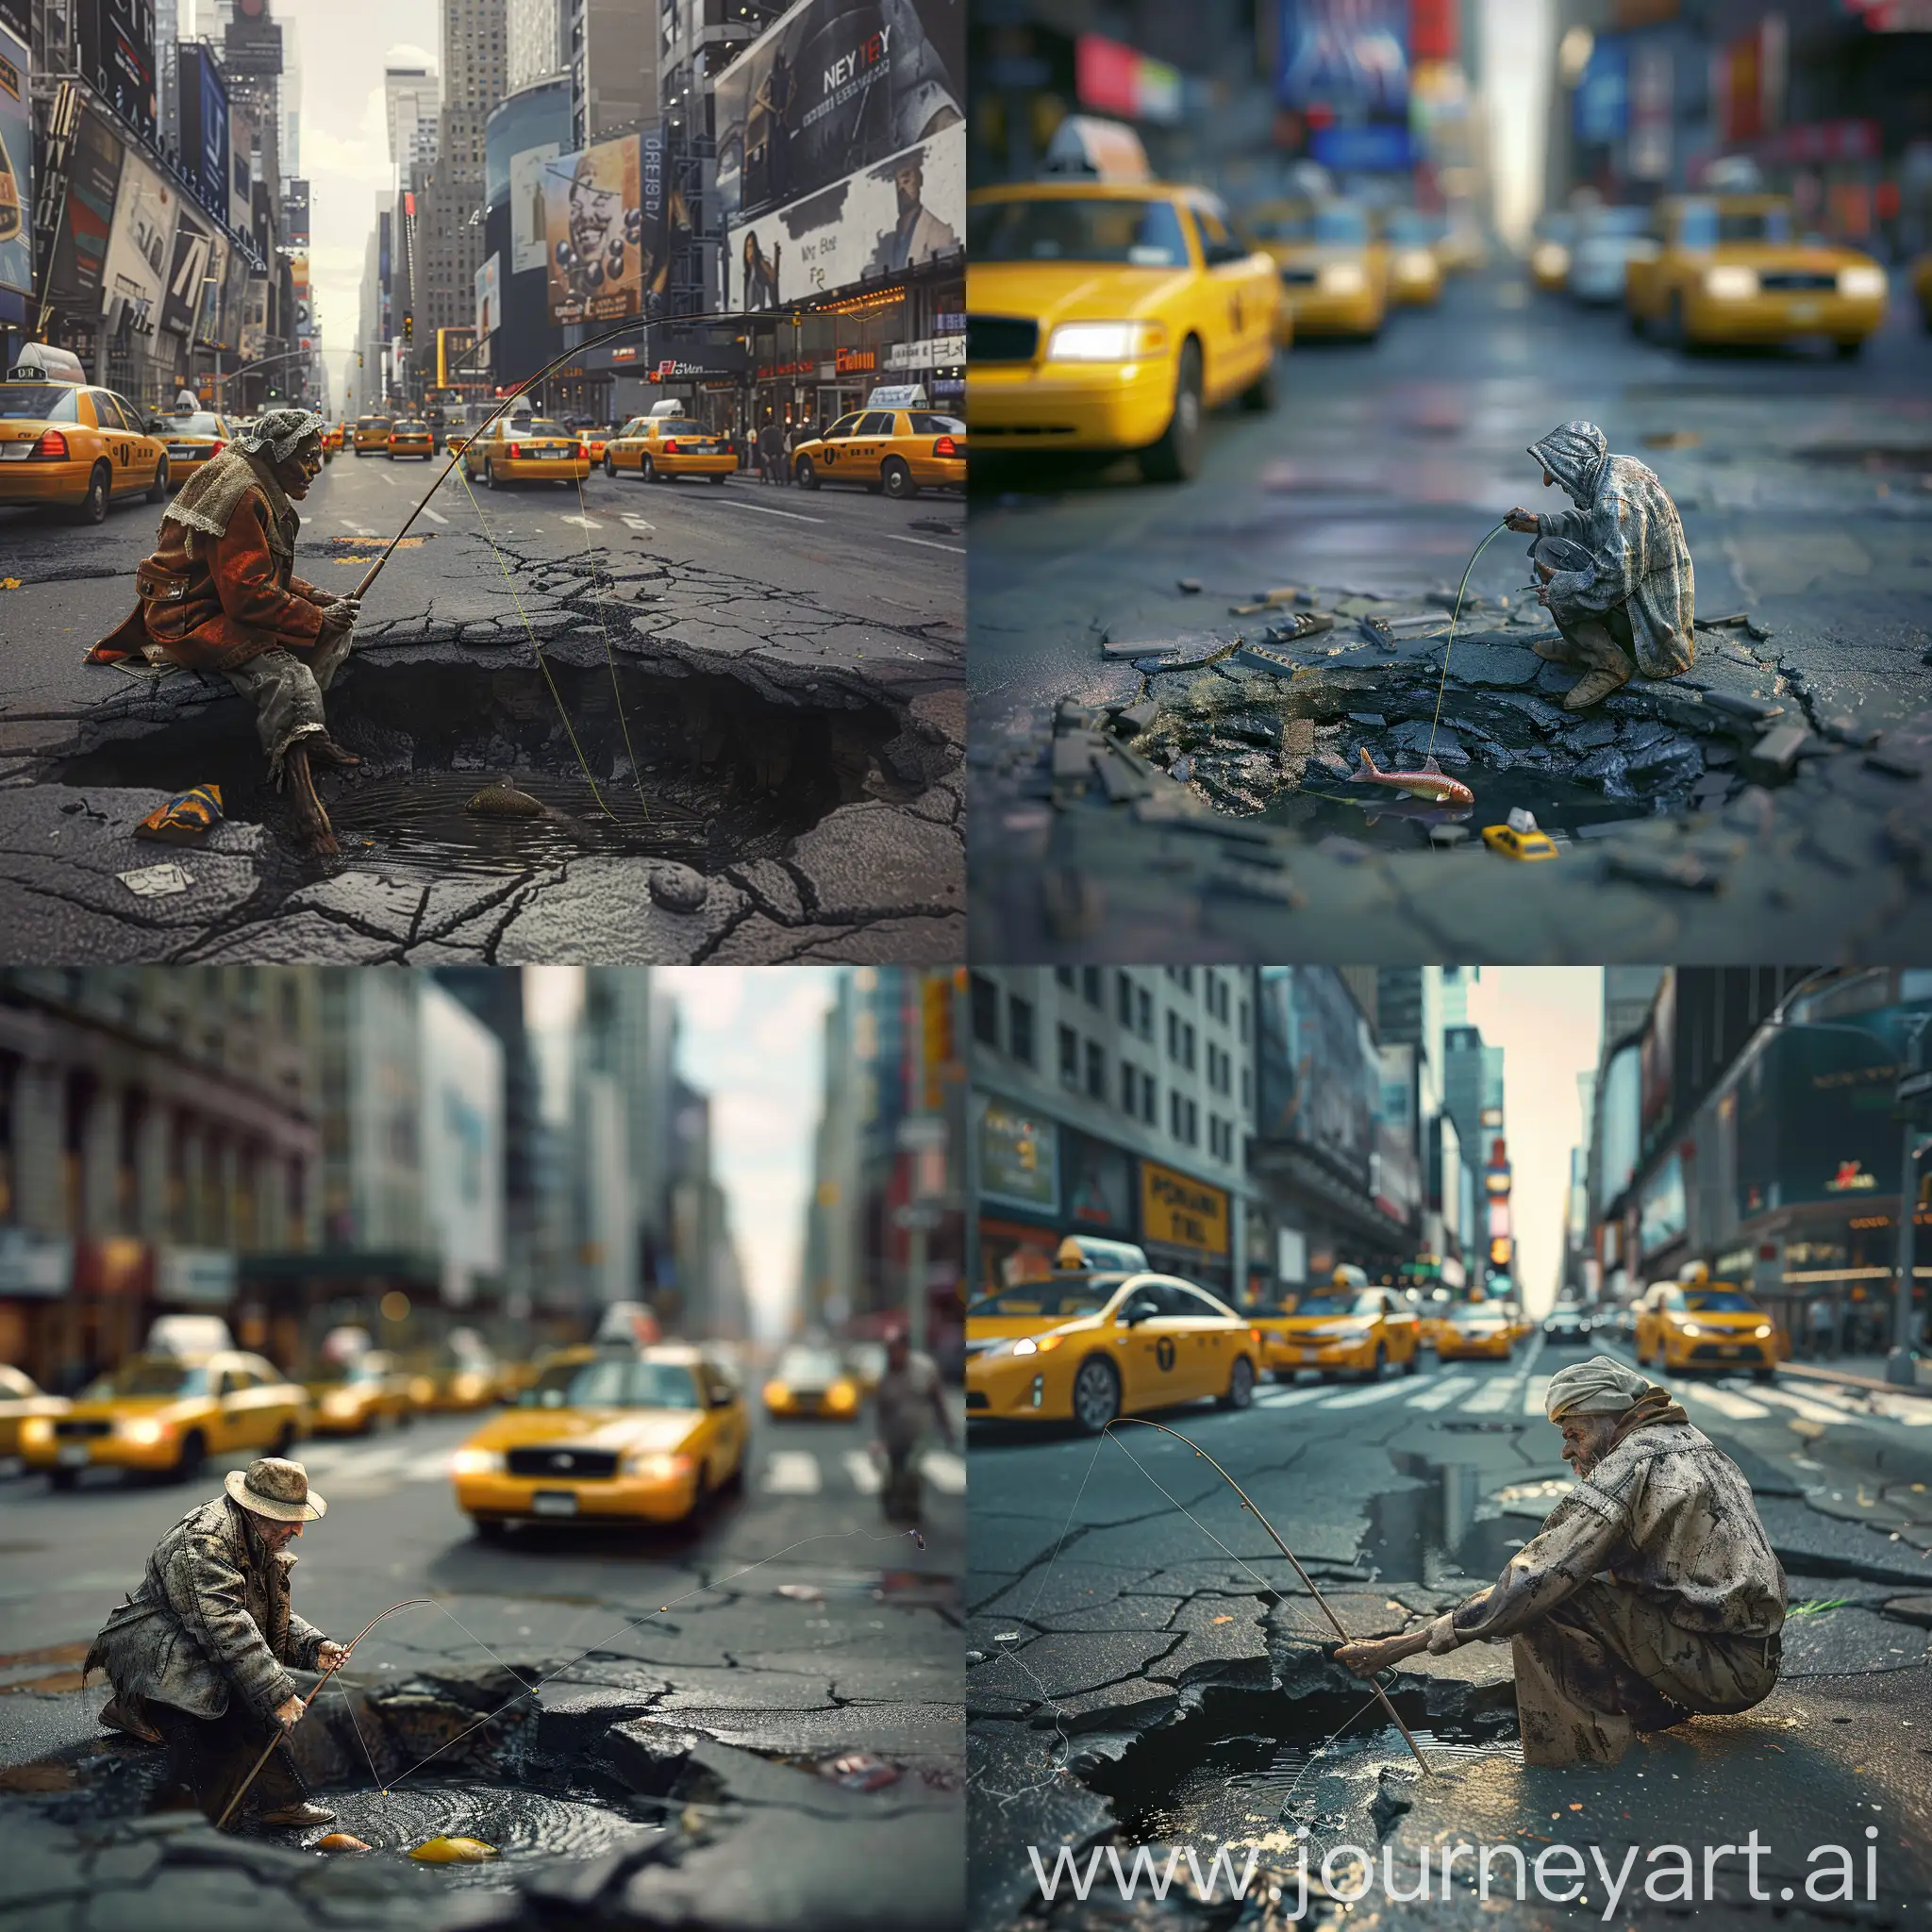 An old man with old clothes fishing in a huge pothole in the middle of the street of new york, many taxi and cars around, ultra realistic, hyper detailed. use sony a7 II camera with an 30mm lens fat F.1.2 aperture setting to blur the background and isolate the subject. use distinctive lighting on the subjects shot. The image should be shot in ultra-high resolution. --v 6